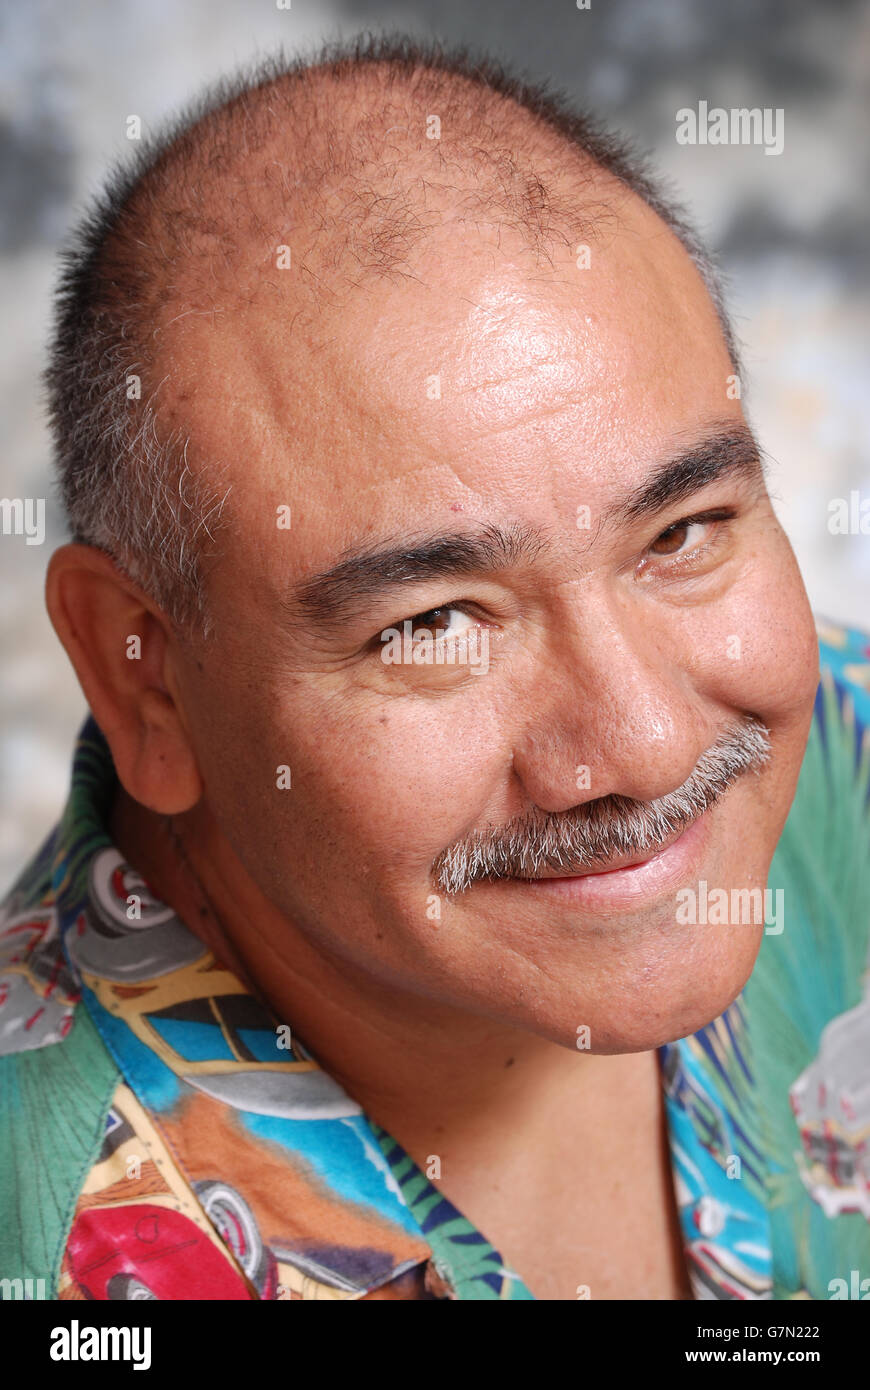 Close up portrait of a smiling senior man wearing a colorful shirt against a muddled gray background. The man is Hispanic. Stock Photo